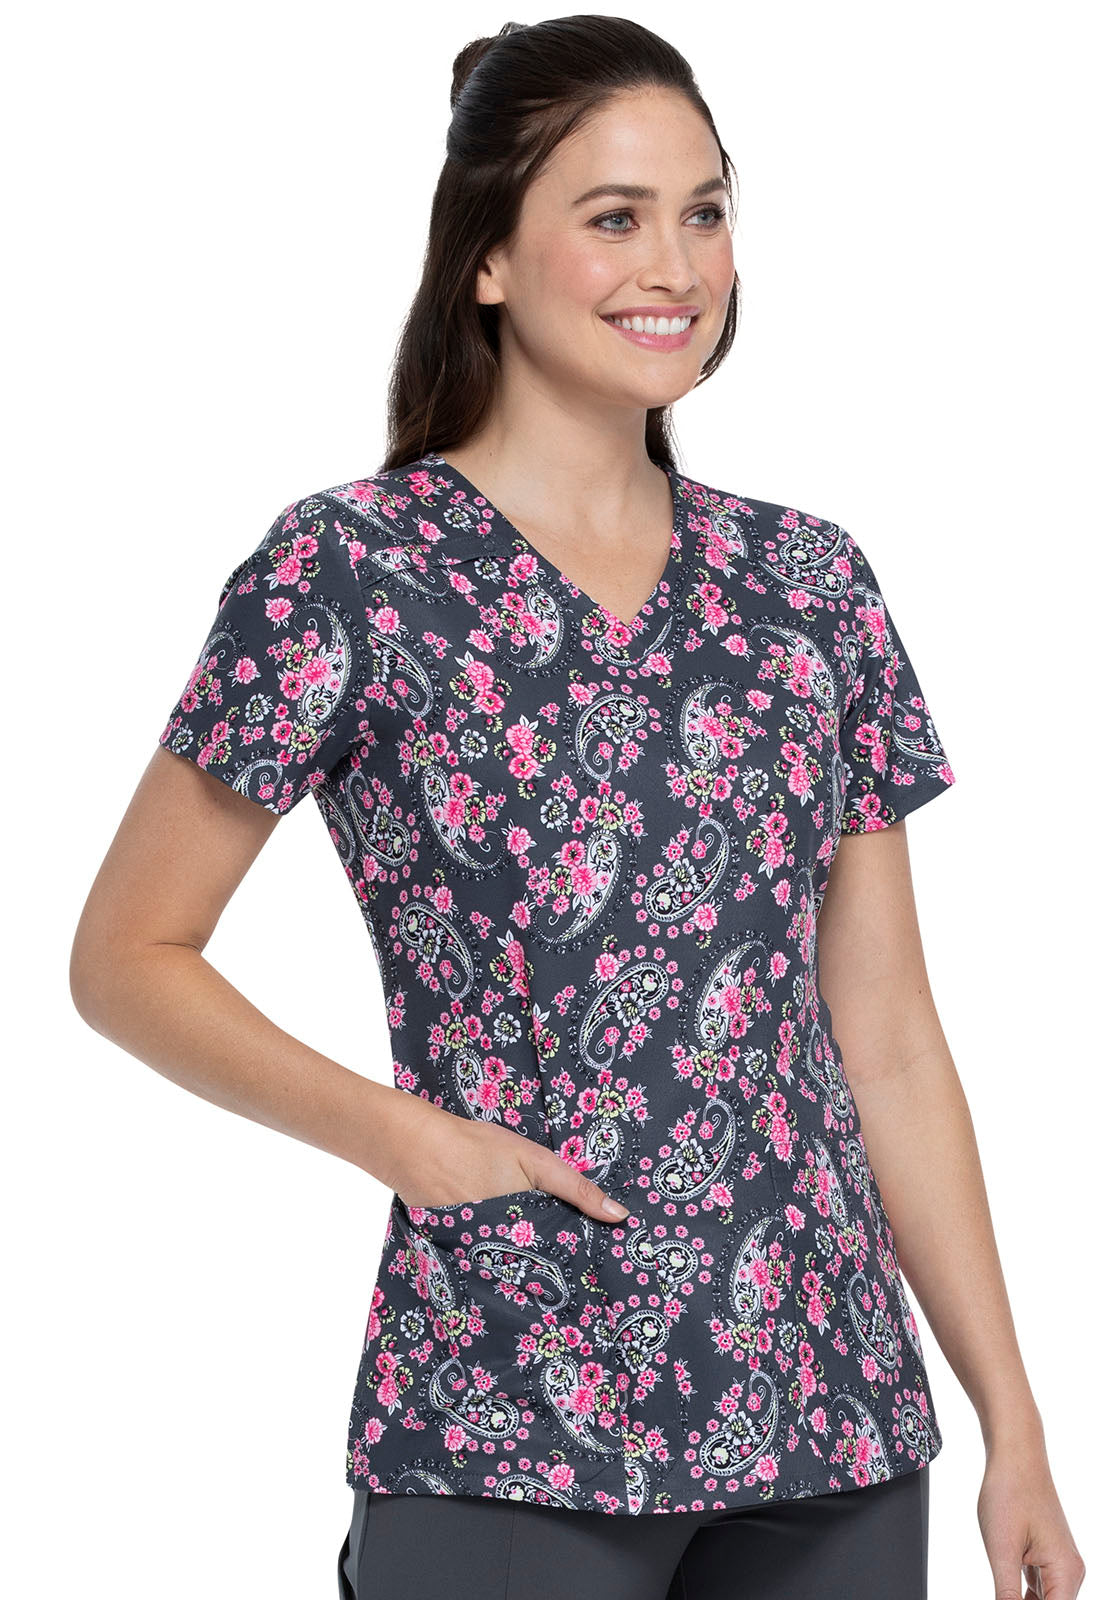 Dickies V-Neck Top in Crazy For Paisley